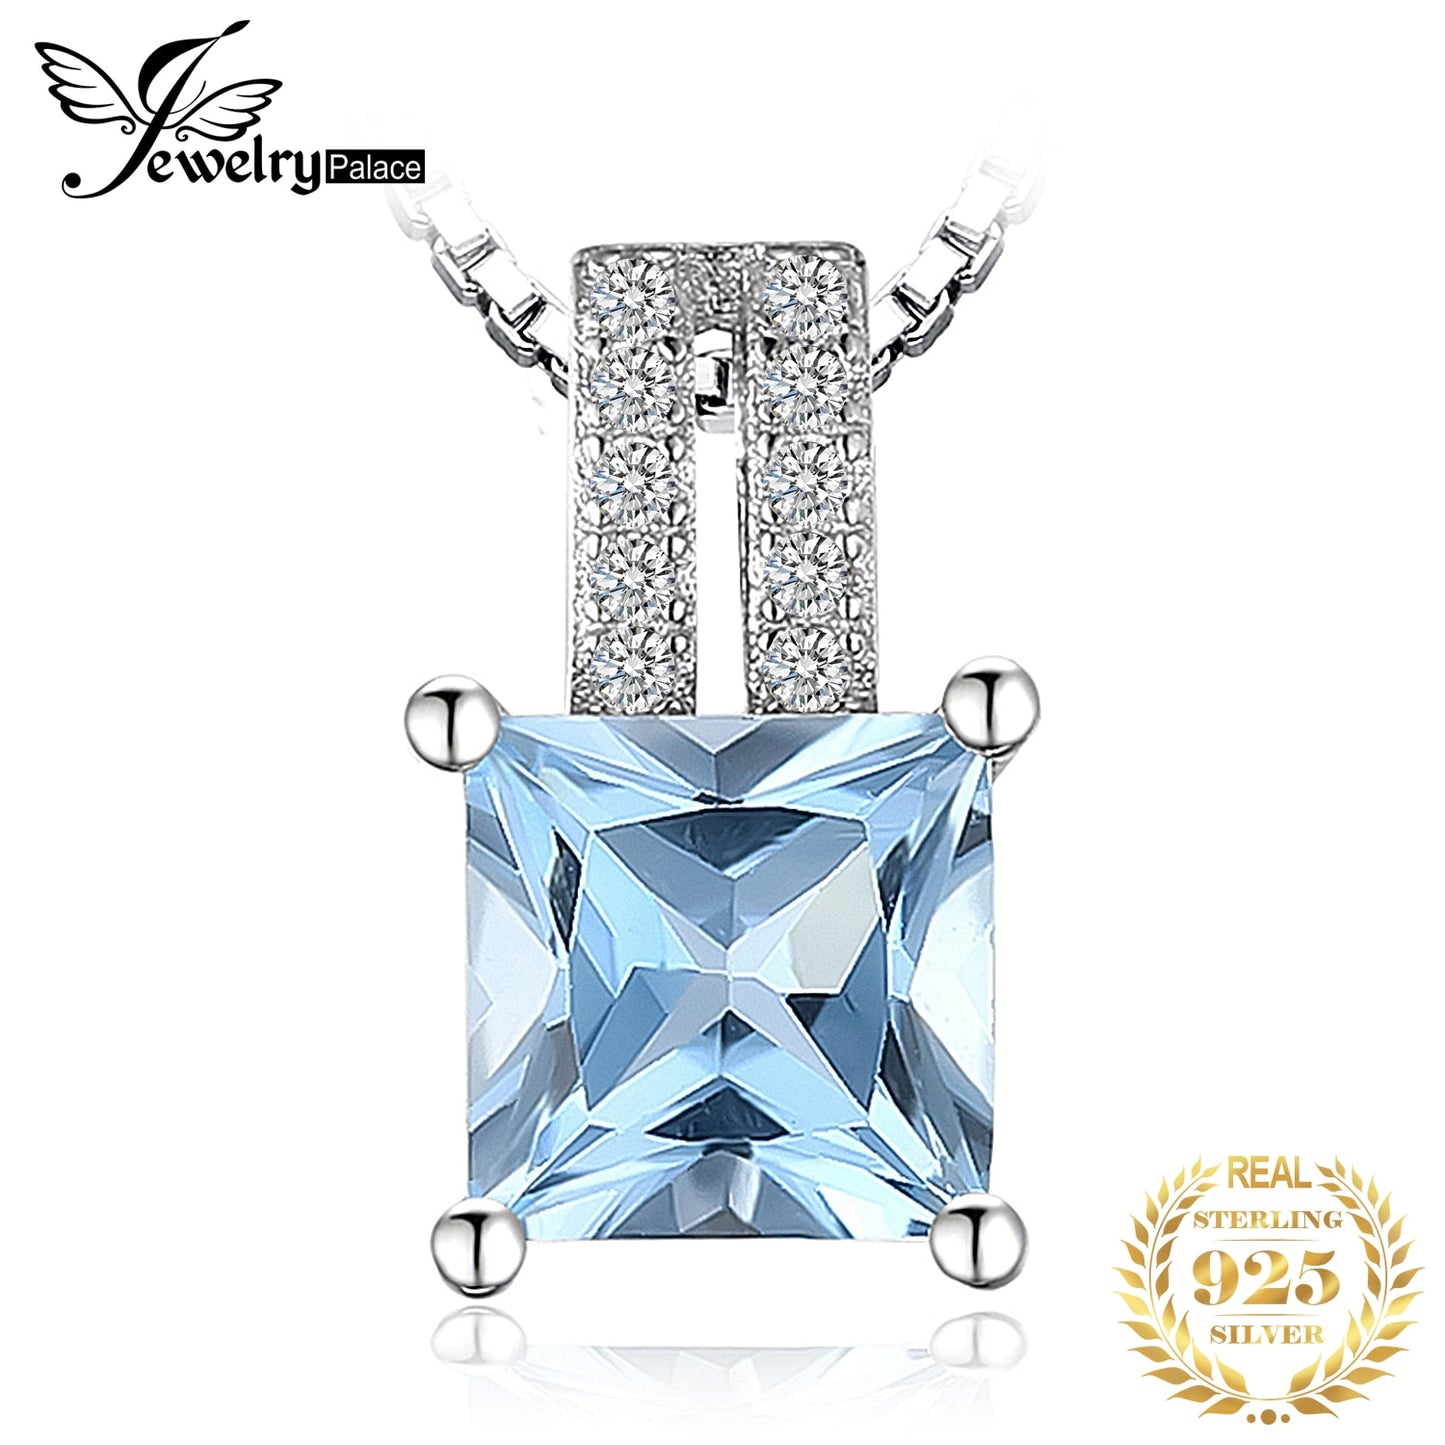 JewelryPalace 1.2ct Princess Cut Blue Topaz 925 Sterling Silver Pendant Necklace for Woman No Chain Yellow Gold Rose Gold Plated